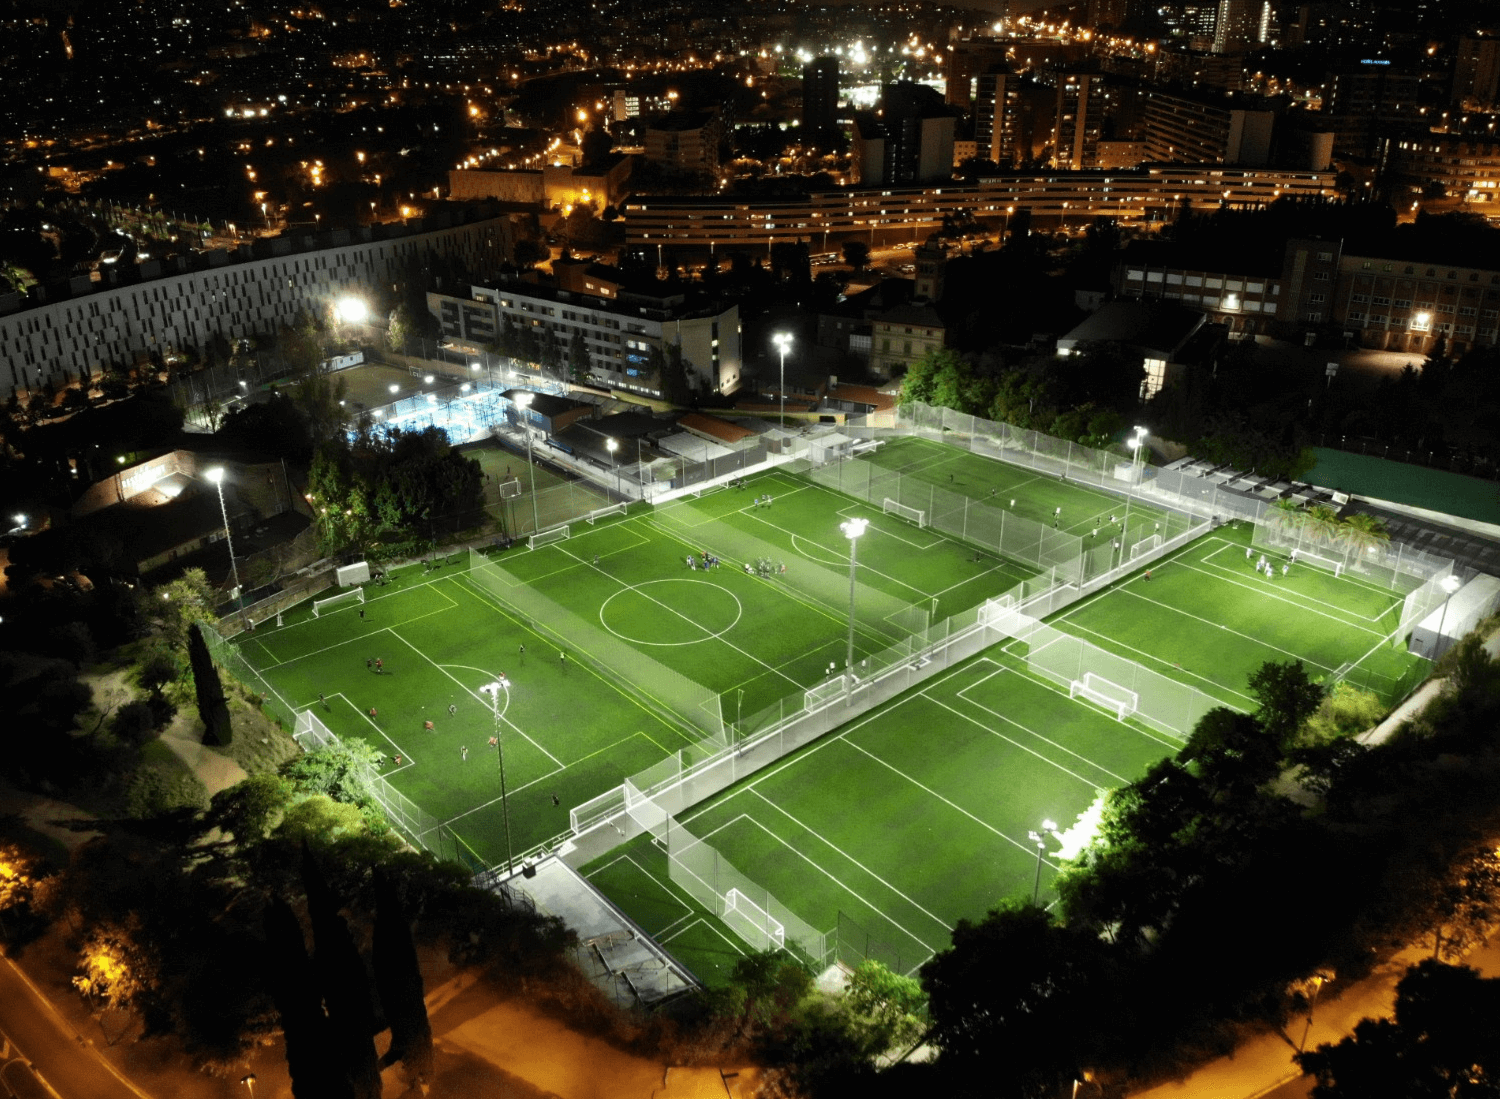 A Soccer Field At Night With Lights On It